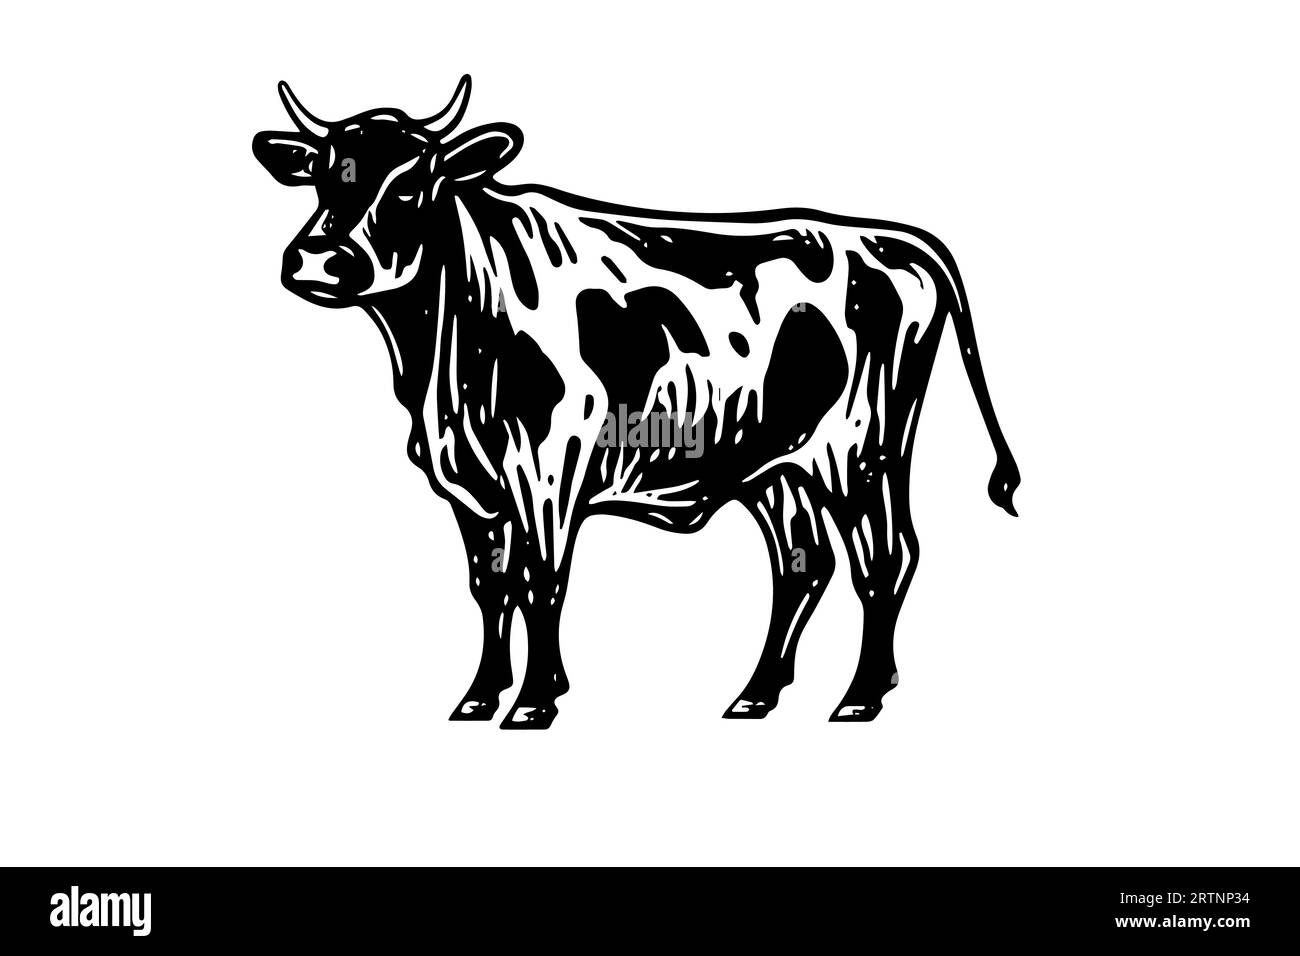 Black cow silhouette for meat industry or farmers market hand drawn stamp effect vector illustration. Stock Vector